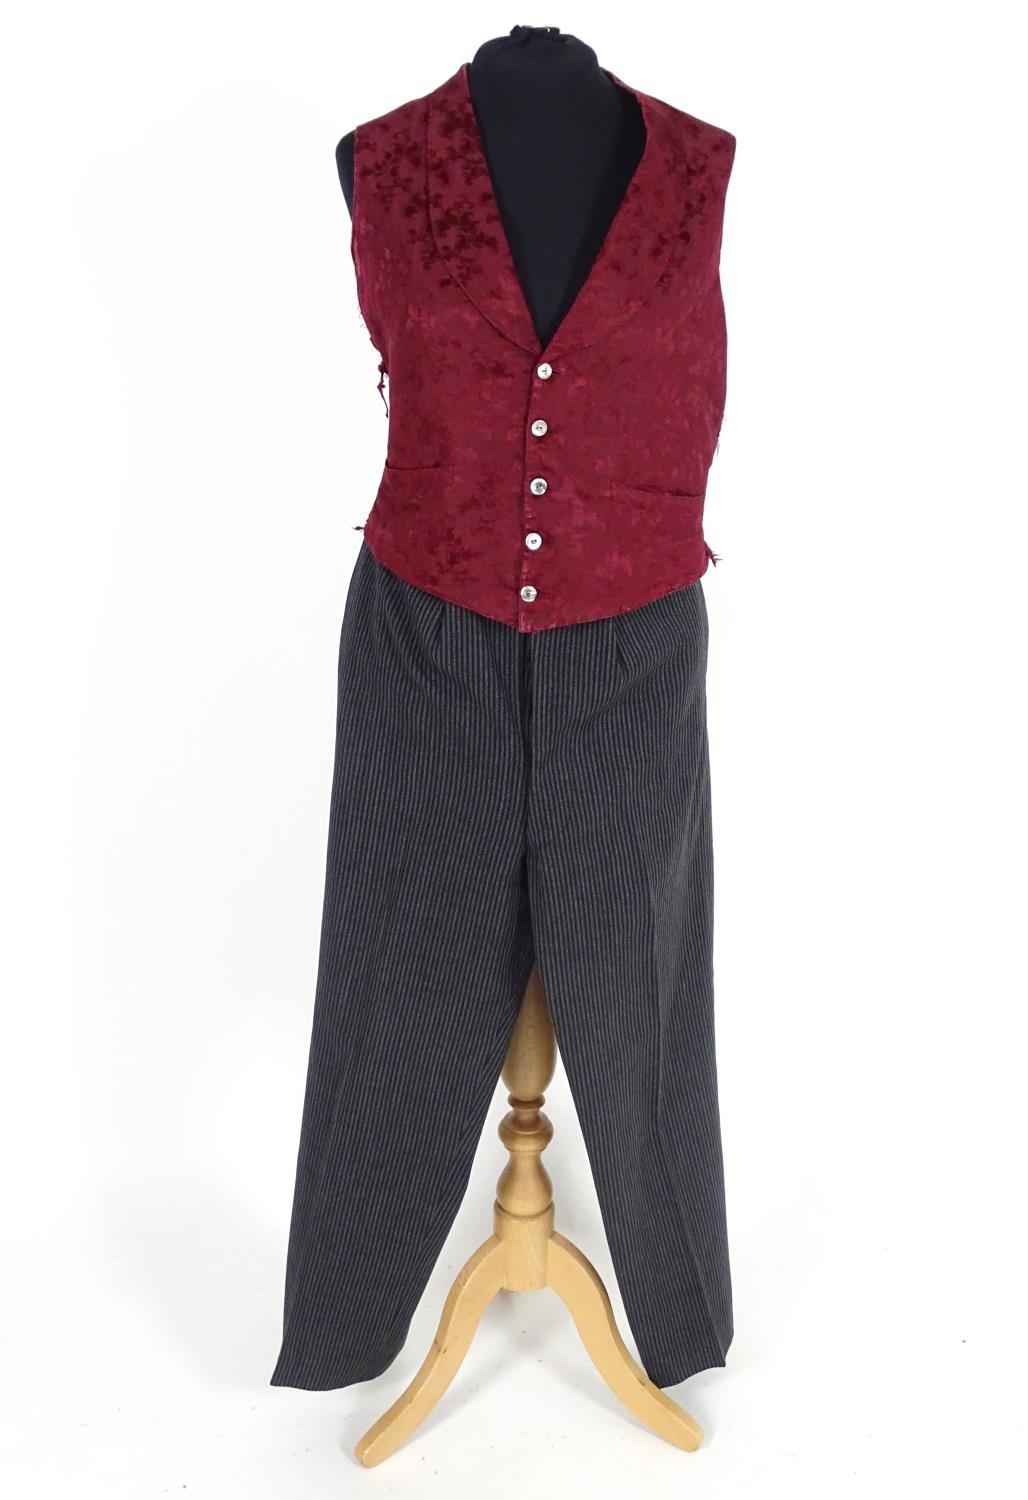 Vintage bespoke mens striped formal trousers with burgundy silk patterned waistcoat . Chest size 36"